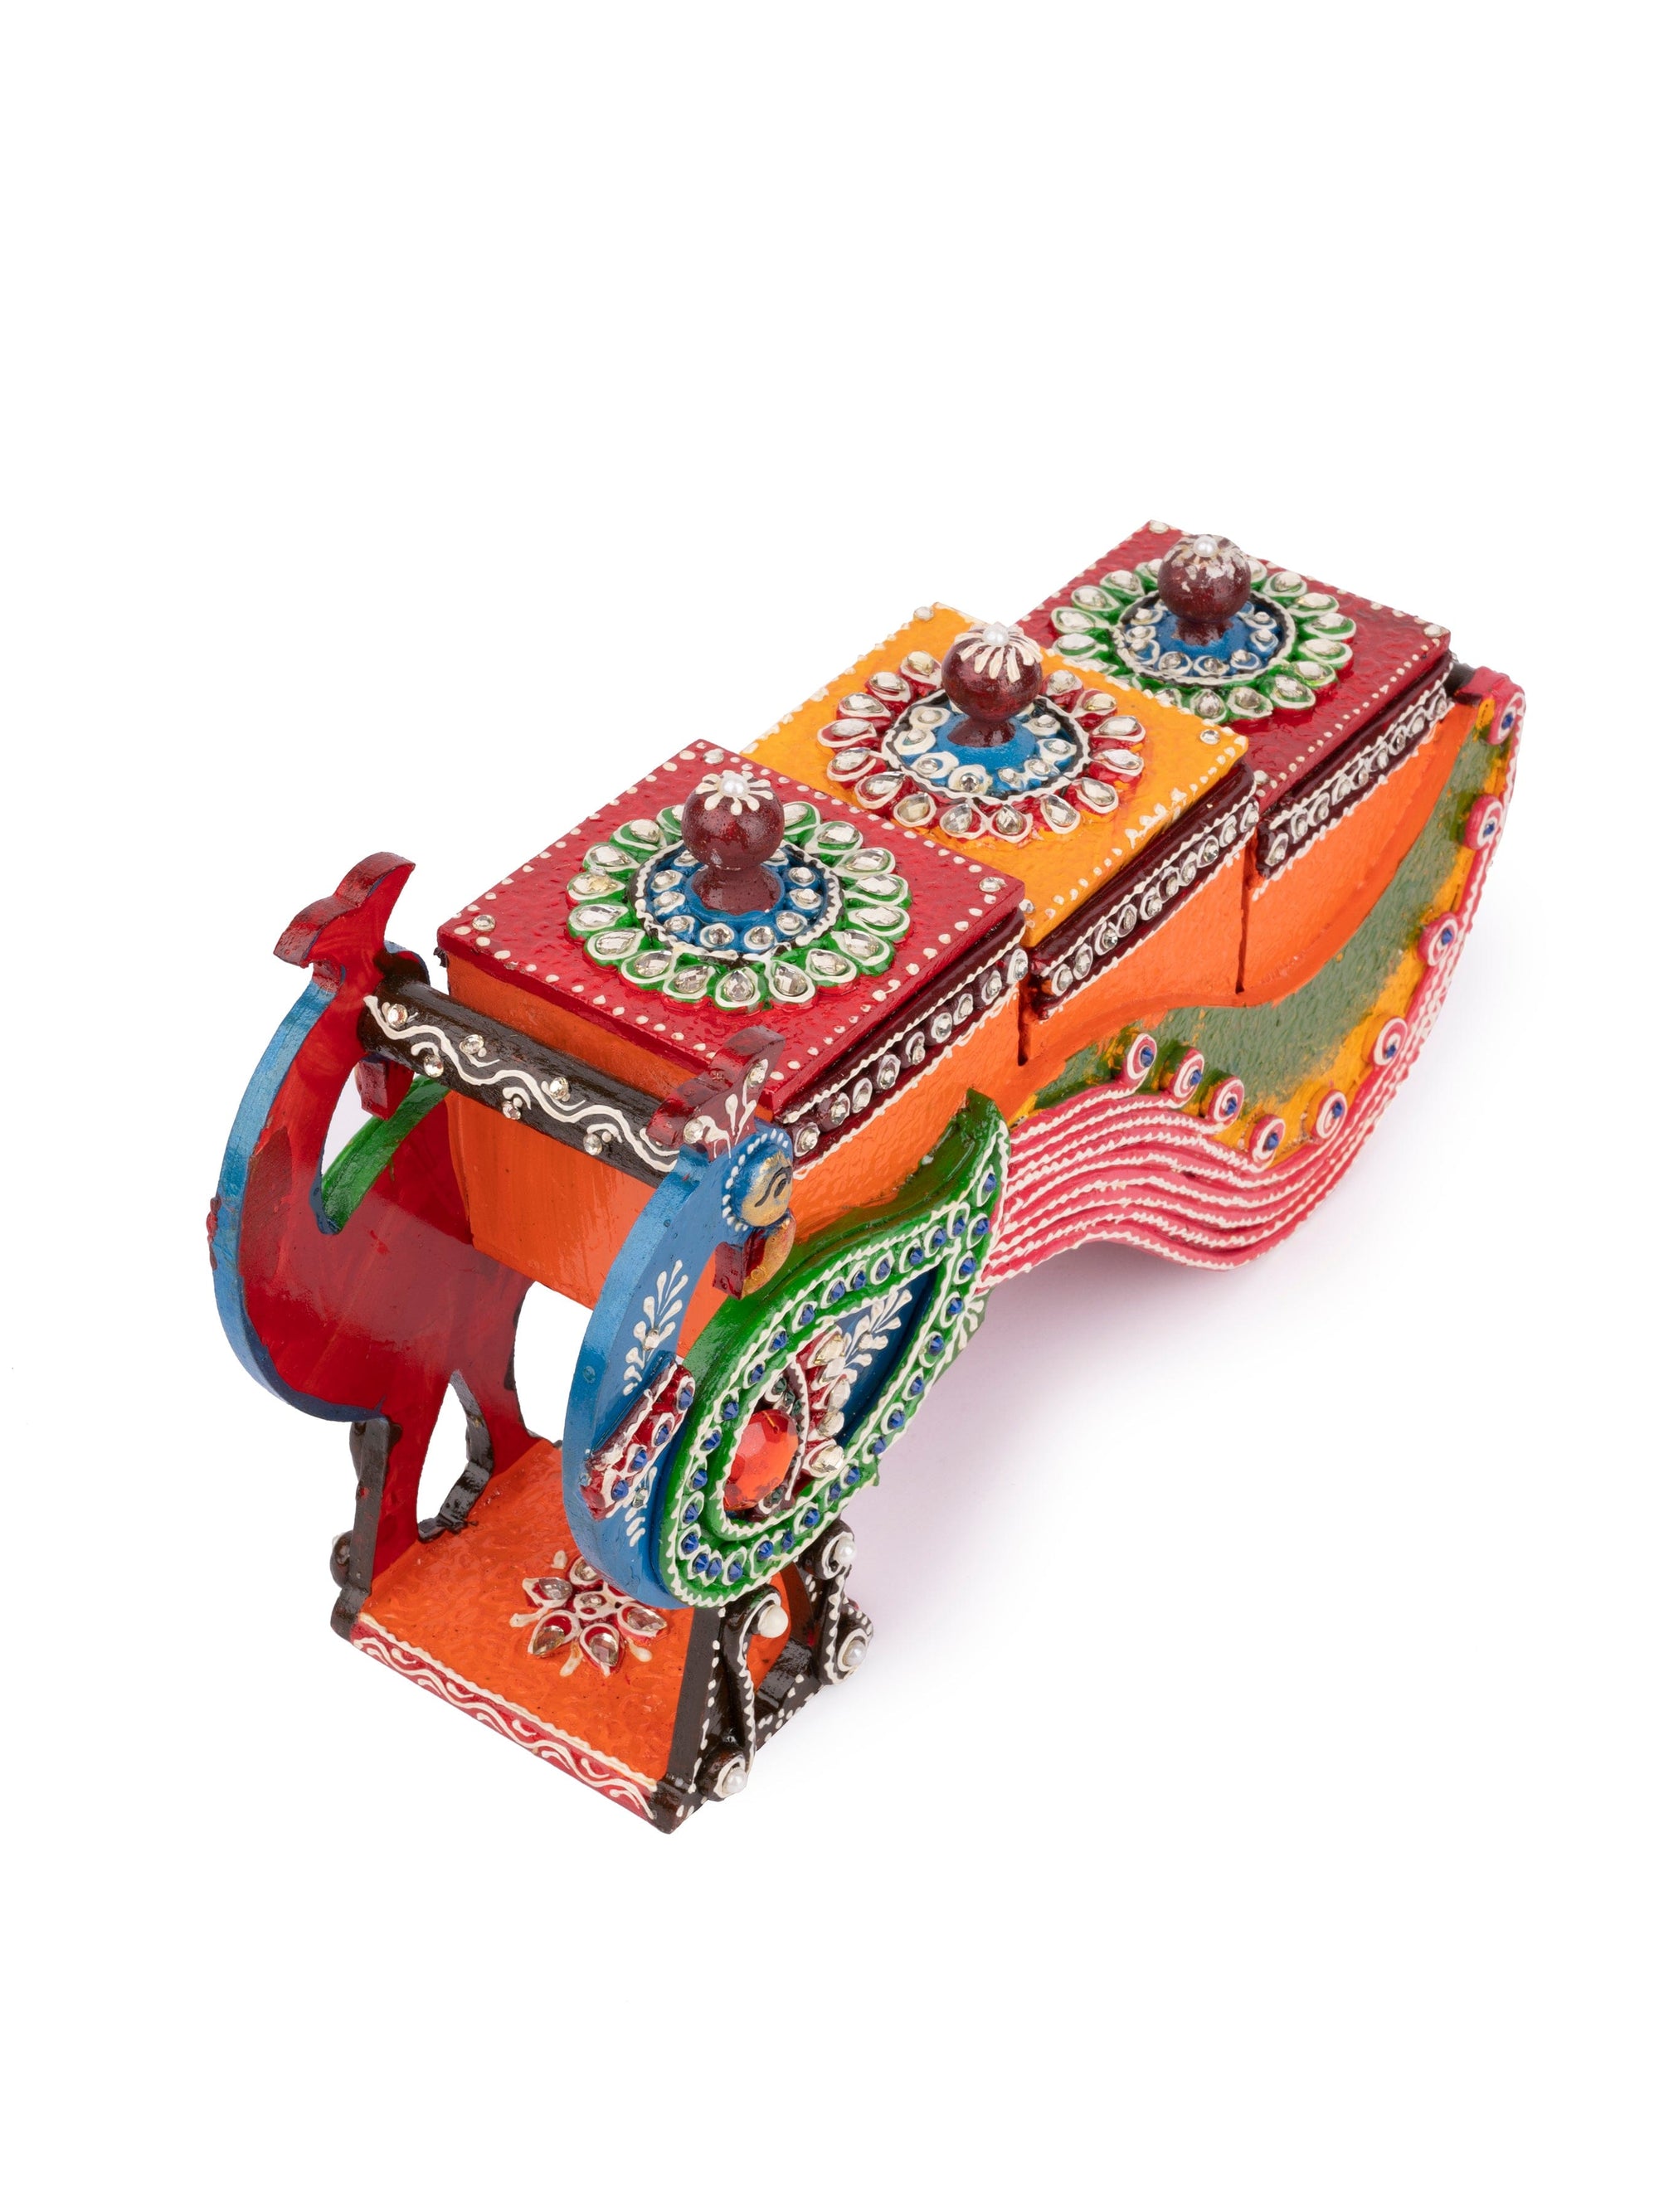 Meenakari Art Peacock Design Holder with 3 Containers for Storing Dry fruits / Spices / Mukhwas - The Heritage Artifacts